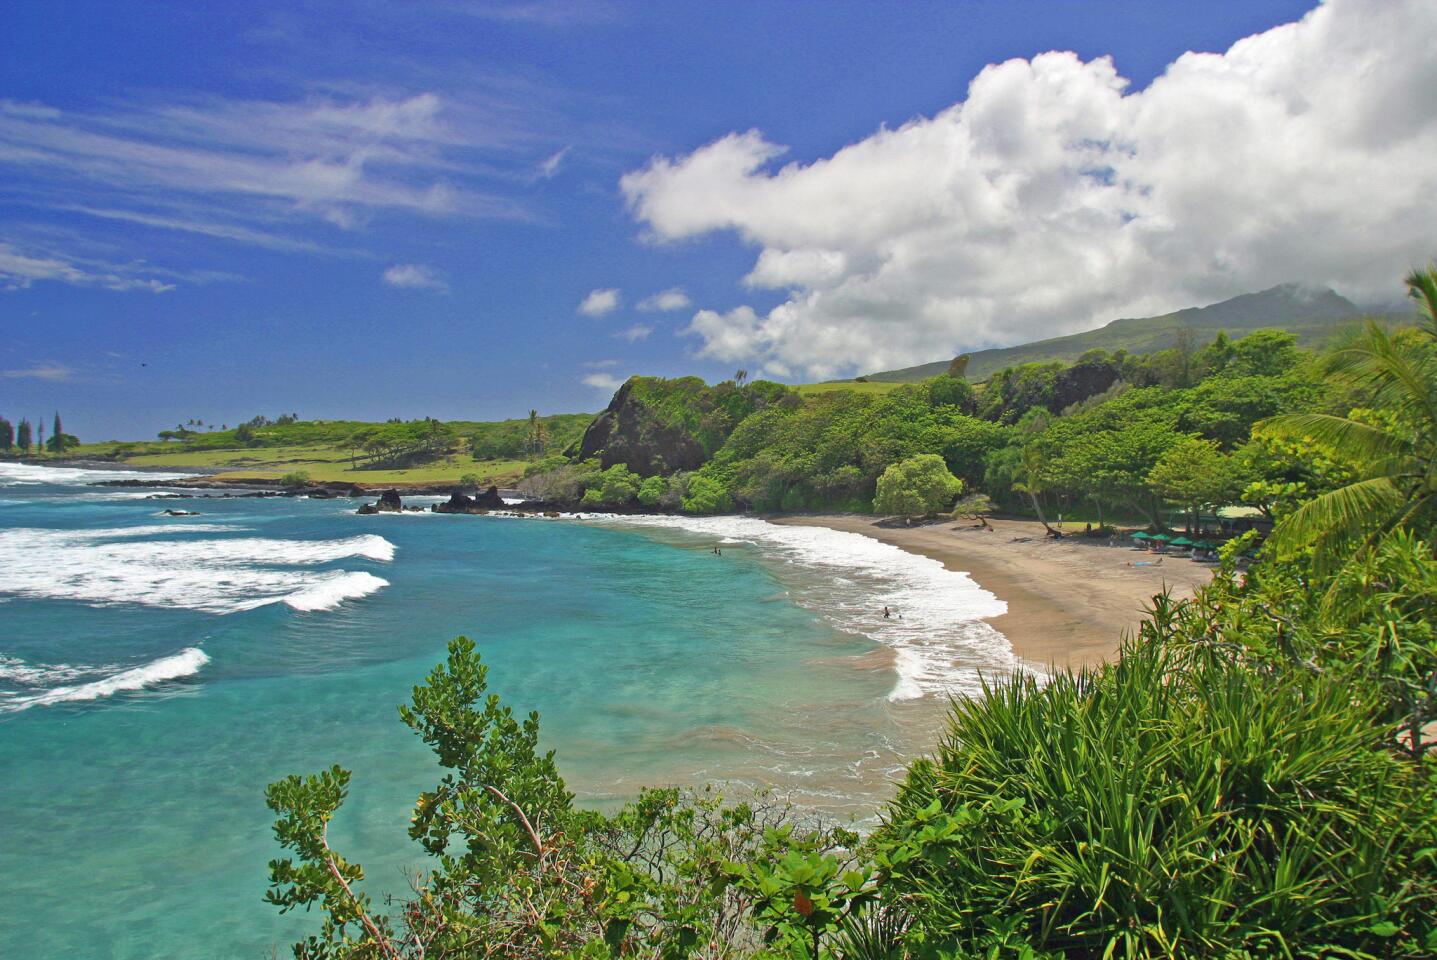 Ranked No. 4 on the 2015 Dr. Beach best beaches in the U.S. list. This Hawaiian beach is on Maui. It's about nine miles south of Hana. If you're making the drive on the famous Road to Hana, Hamoa could be a lovely refresher.